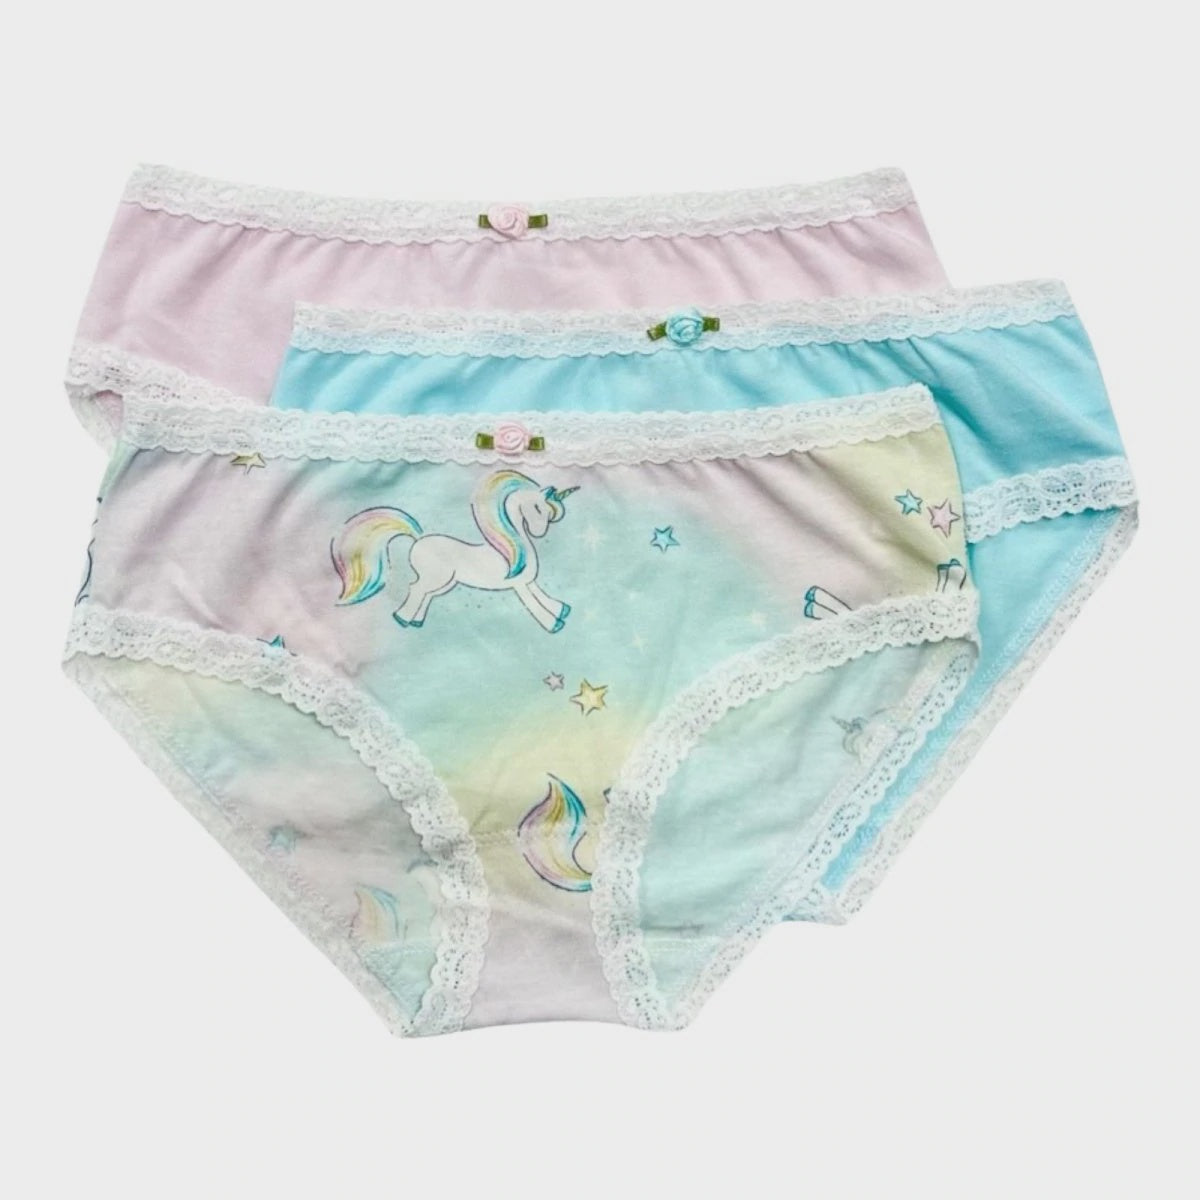 Girls Brief Panty - Multicolored Unicorn Print Panties for Girls - Pack of 4